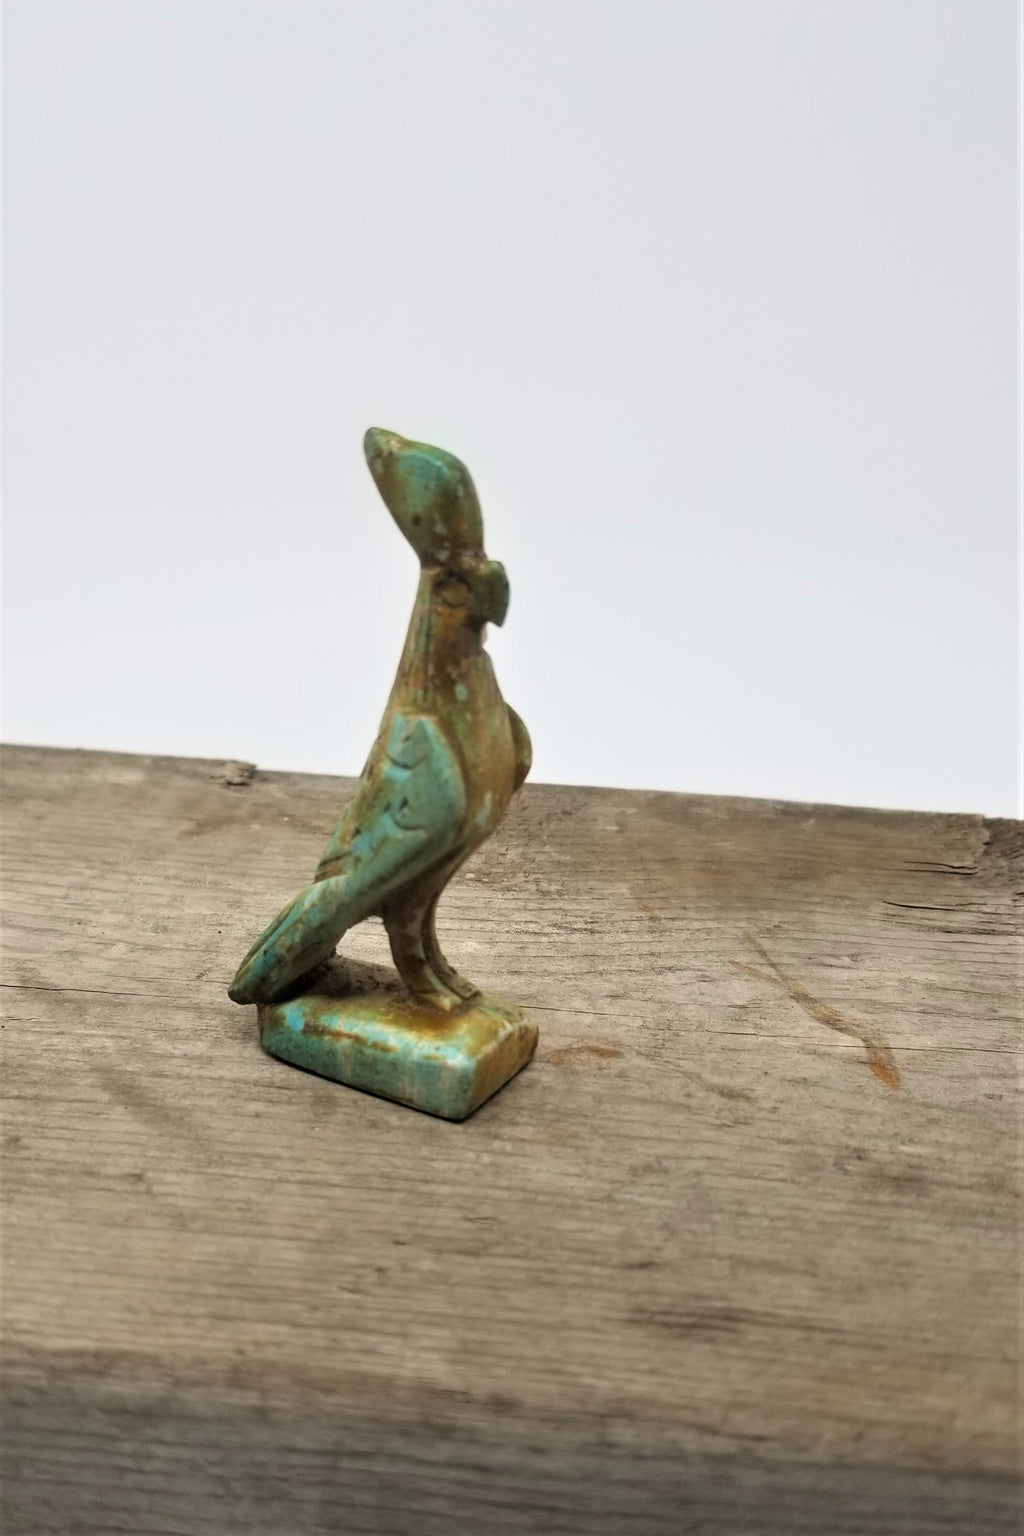 A statue of the Egyptian God Horus in bird form Miniature